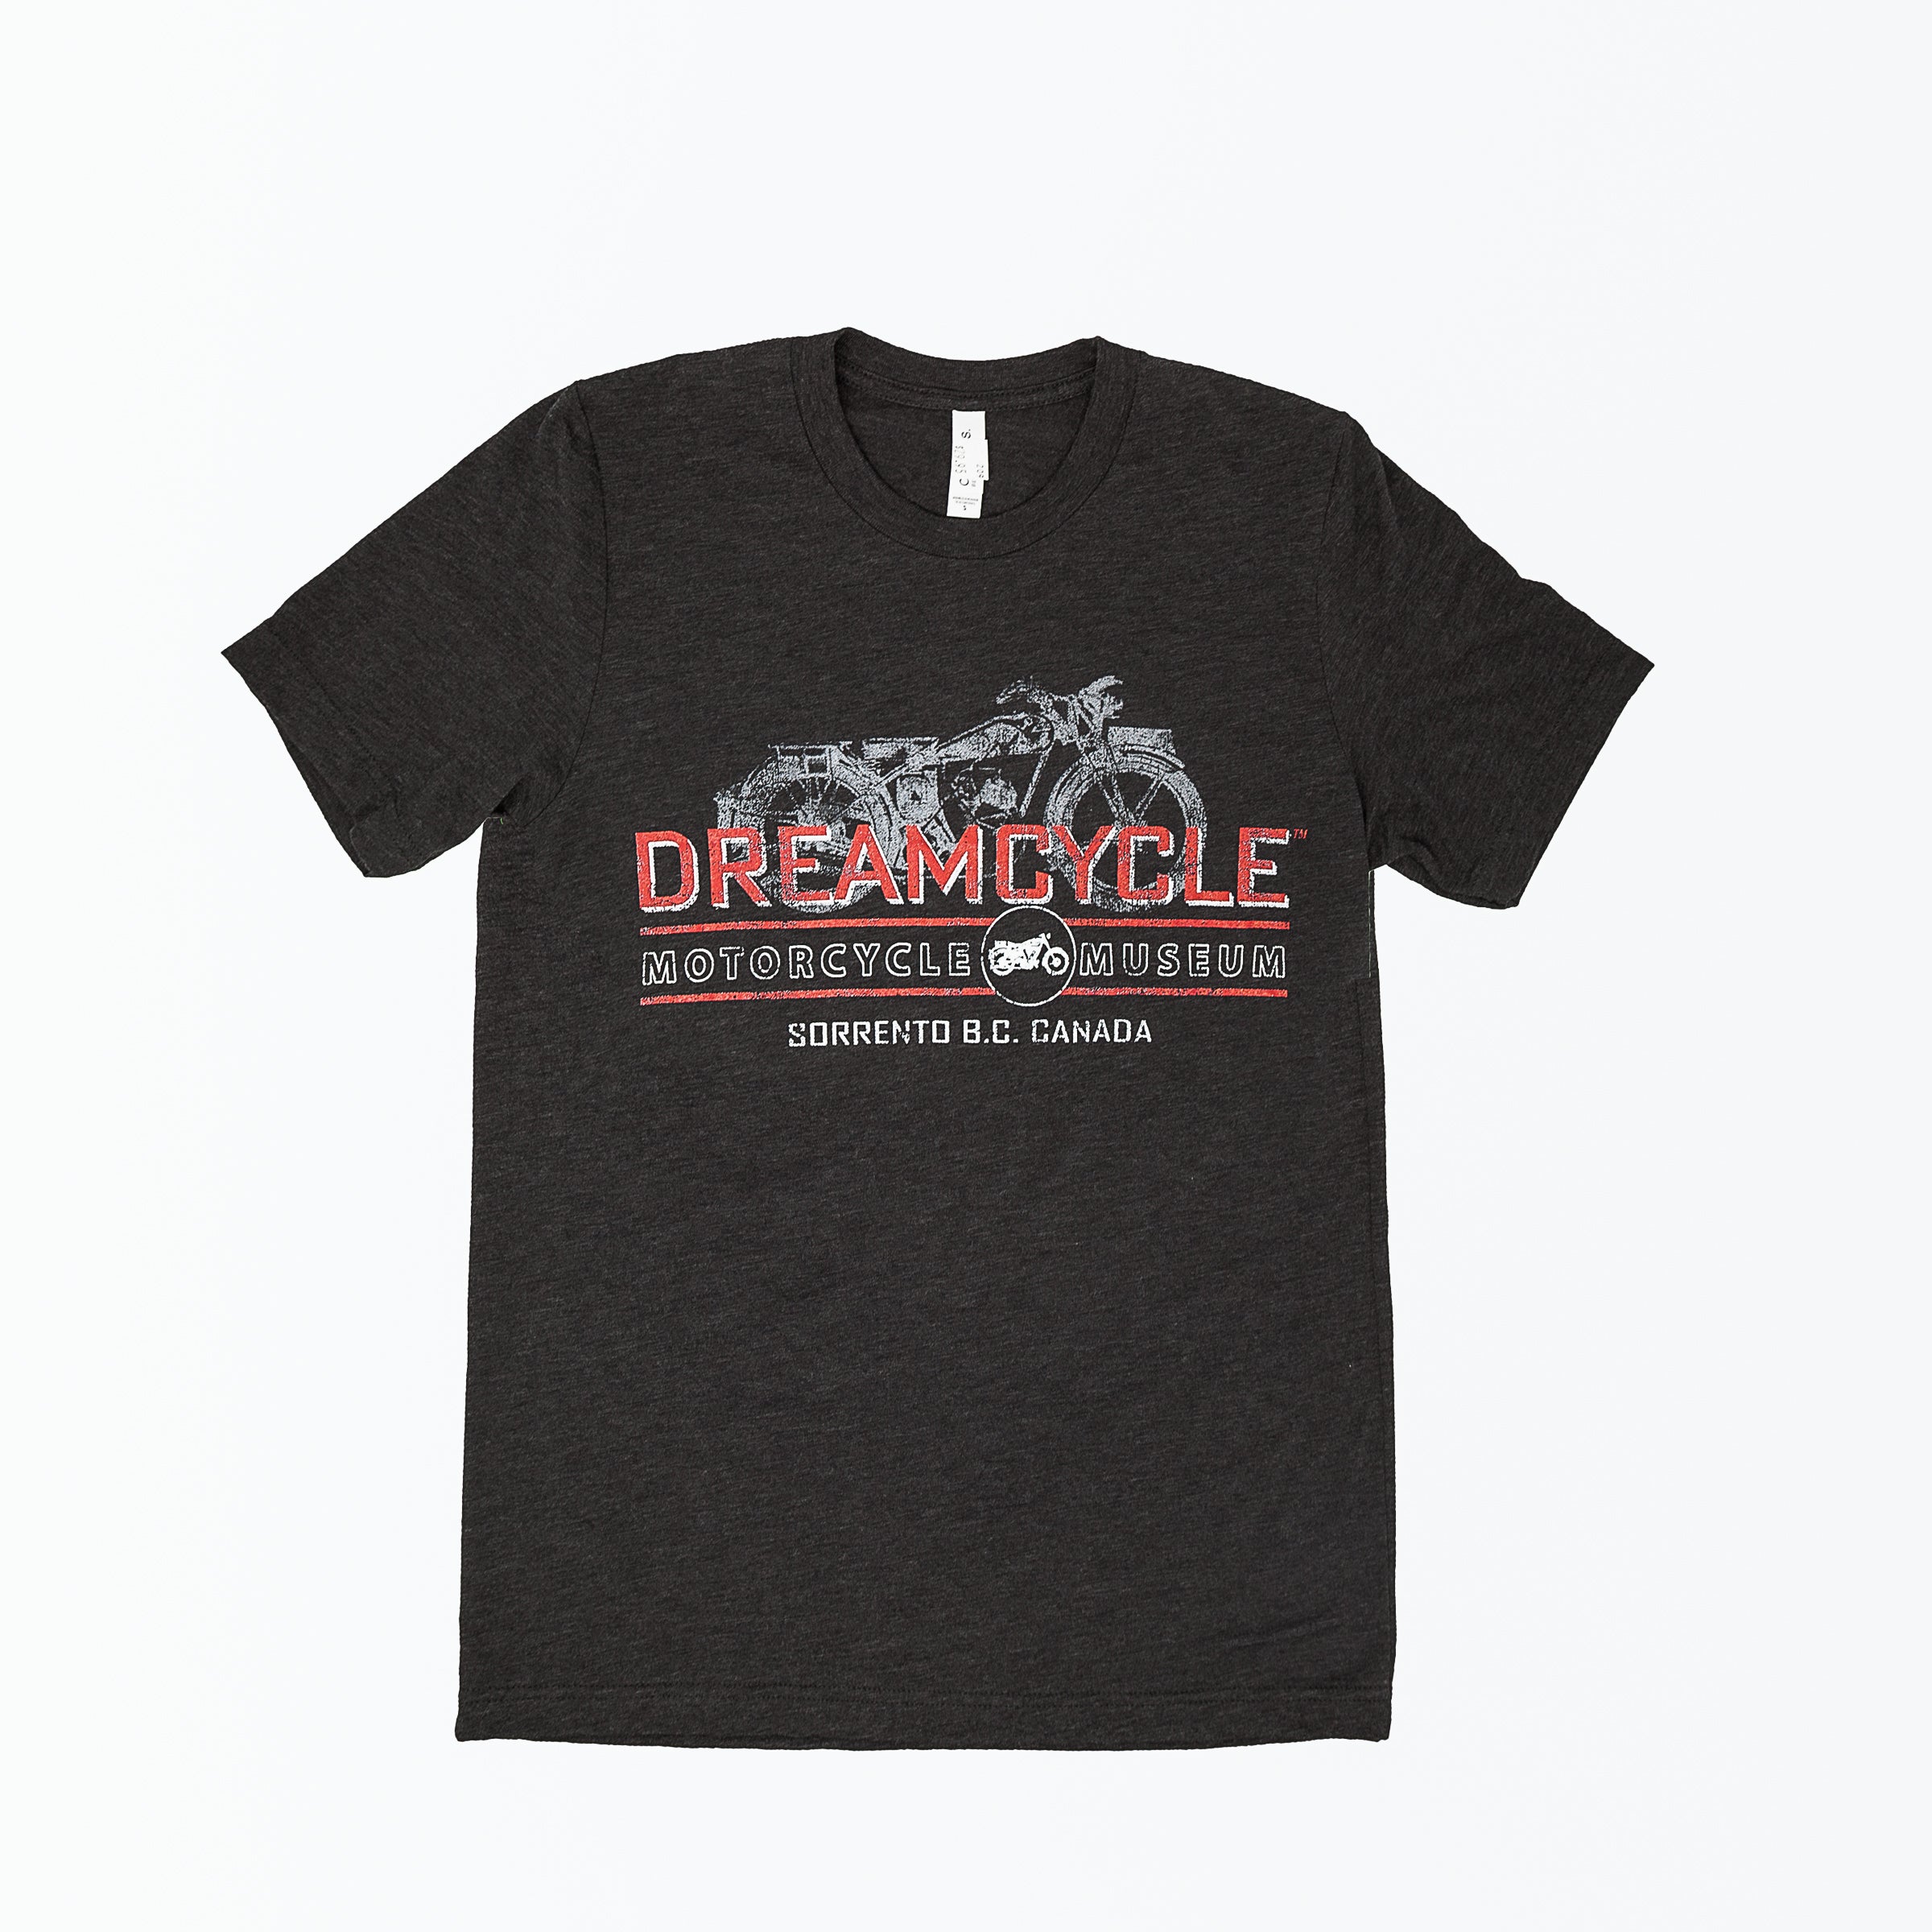 Dreamcycle Motorcycle Museum | Dreamchycle tshirt with motorcycle on white background